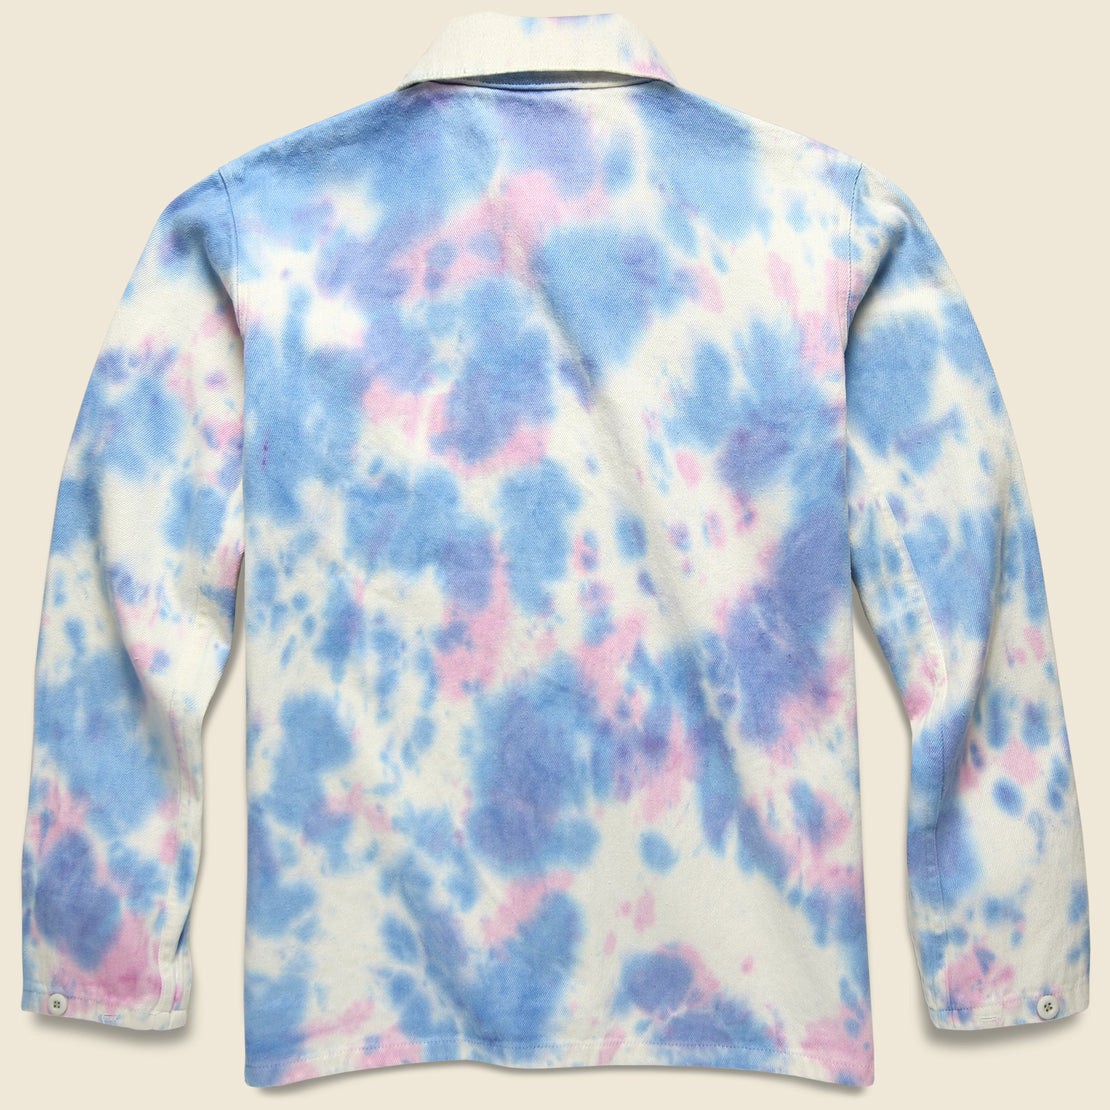 Olympic Jacket - Spacesuit Tie Dye - Jungmaven - STAG Provisions - Outerwear - Coat / Jacket